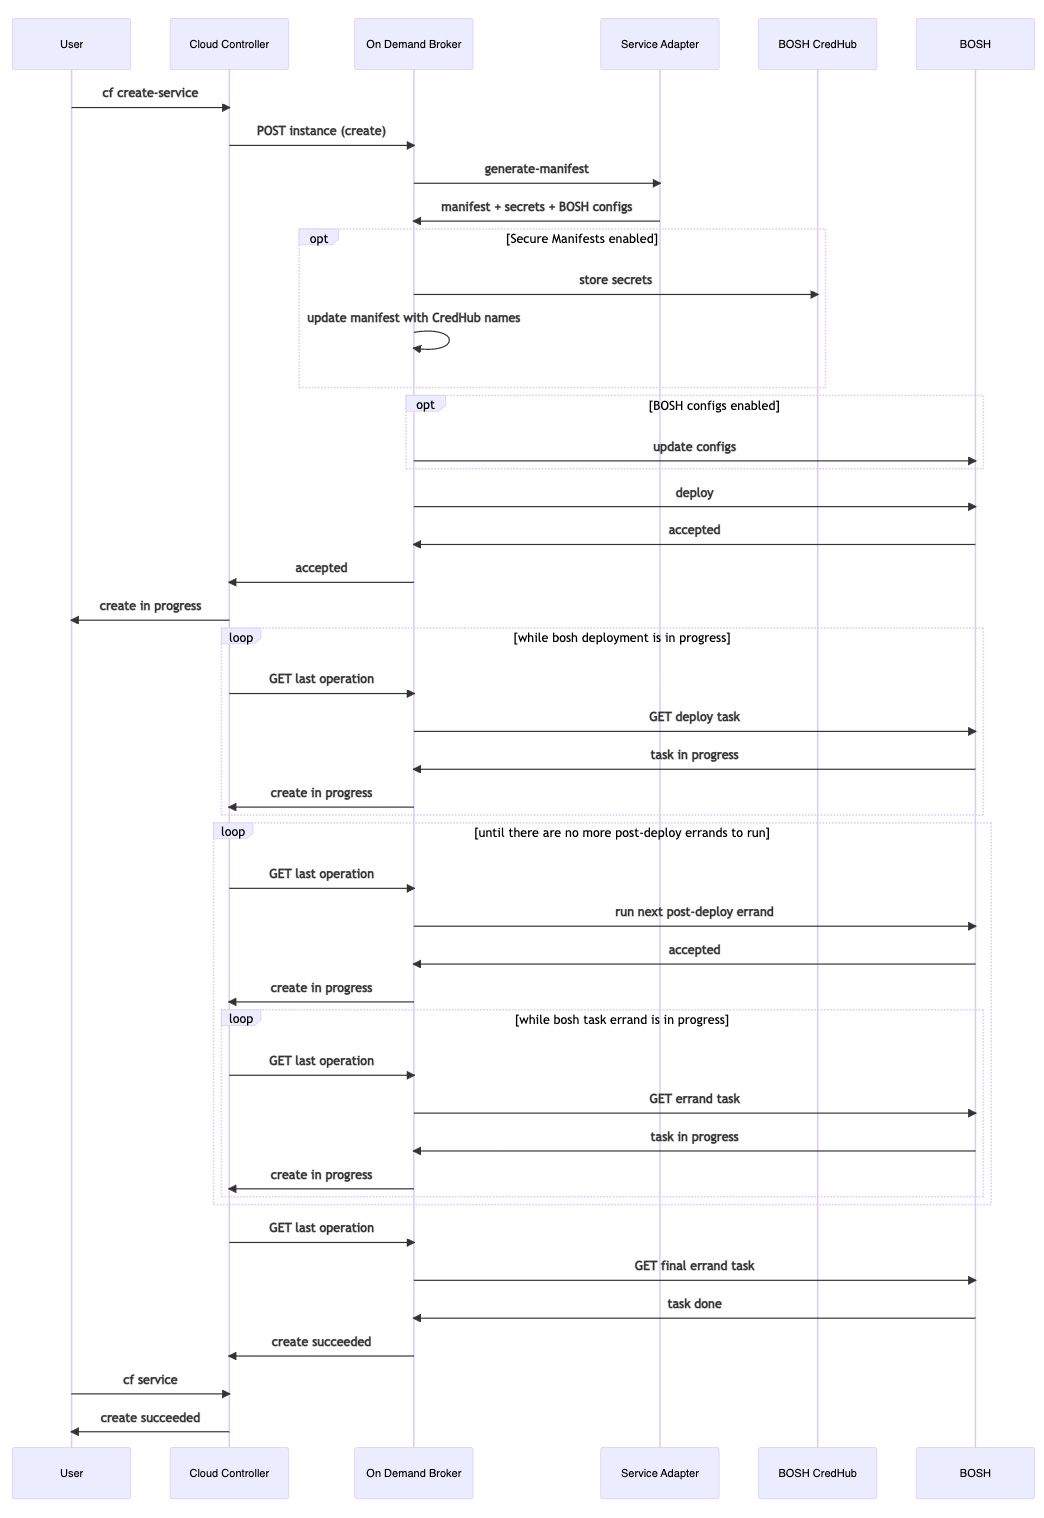 Workflow diagram for creating or updating a service instance when post-deploy errands are configured.